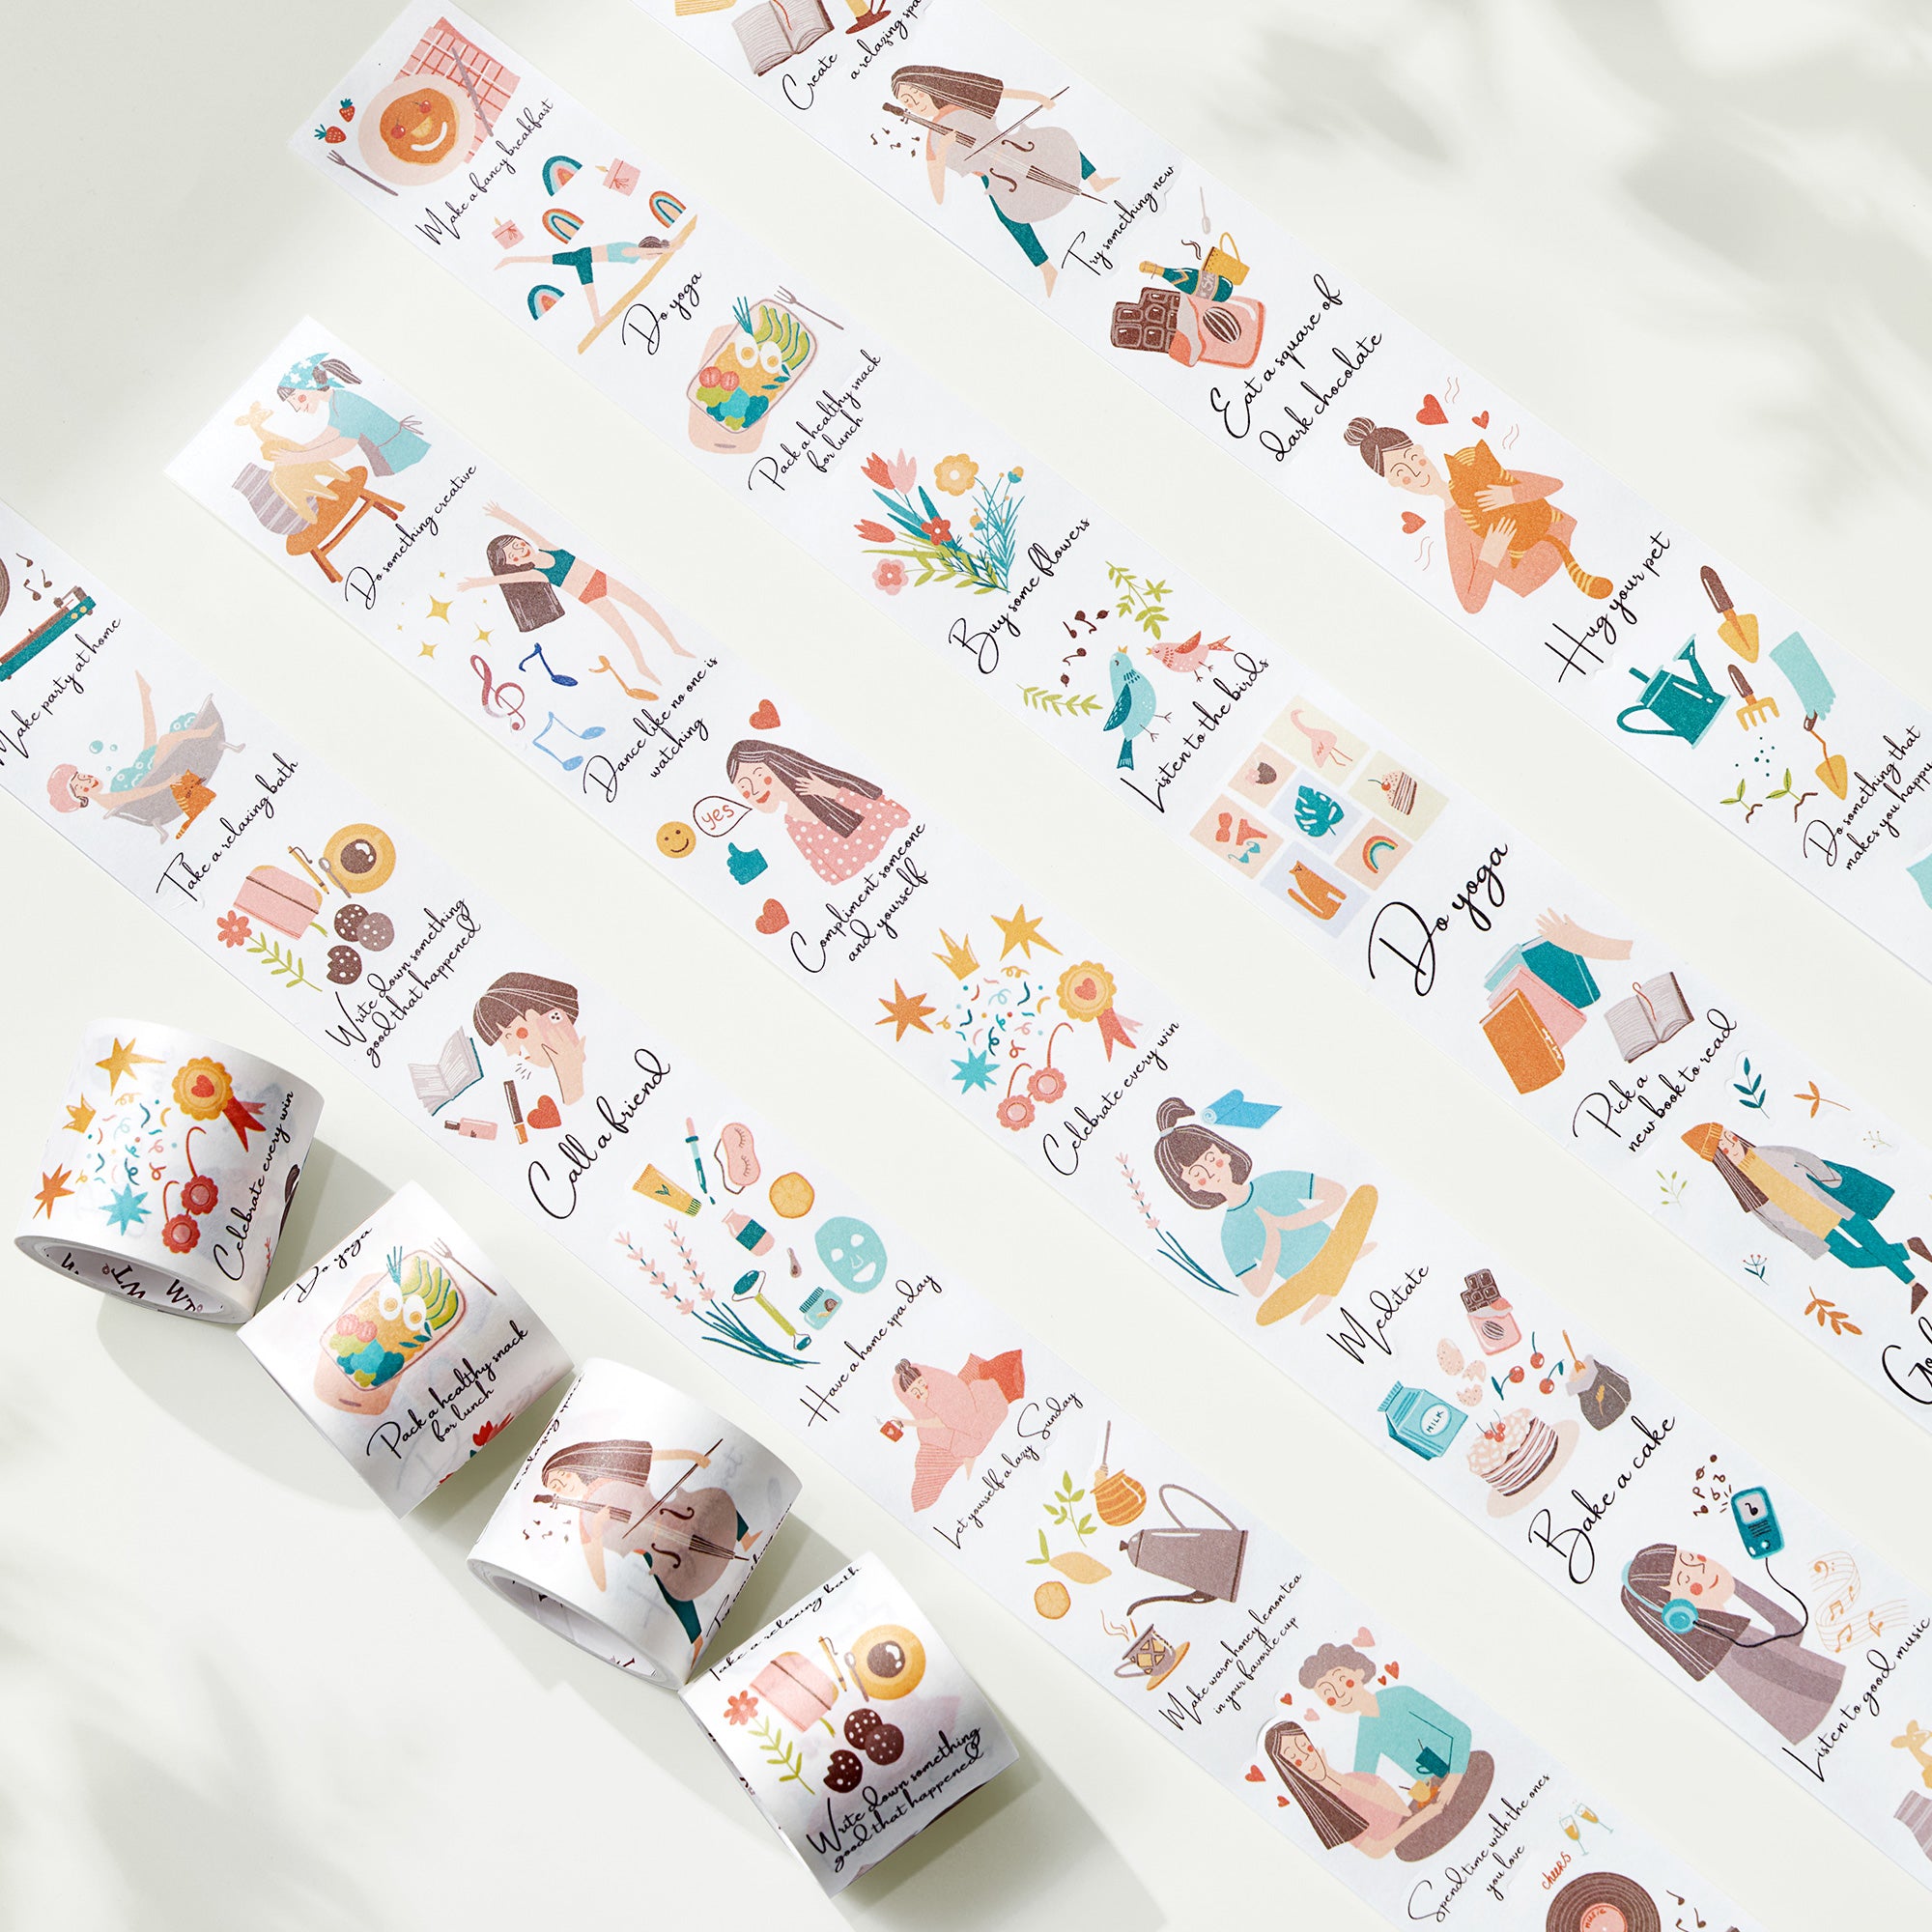 Life&#39;s Essense Washi Tape Sticker Set | The Washi Tape Shop. Beautiful Washi and Decorative Tape For Bullet Journals, Gift Wrapping, Planner Decoration and DIY Projects